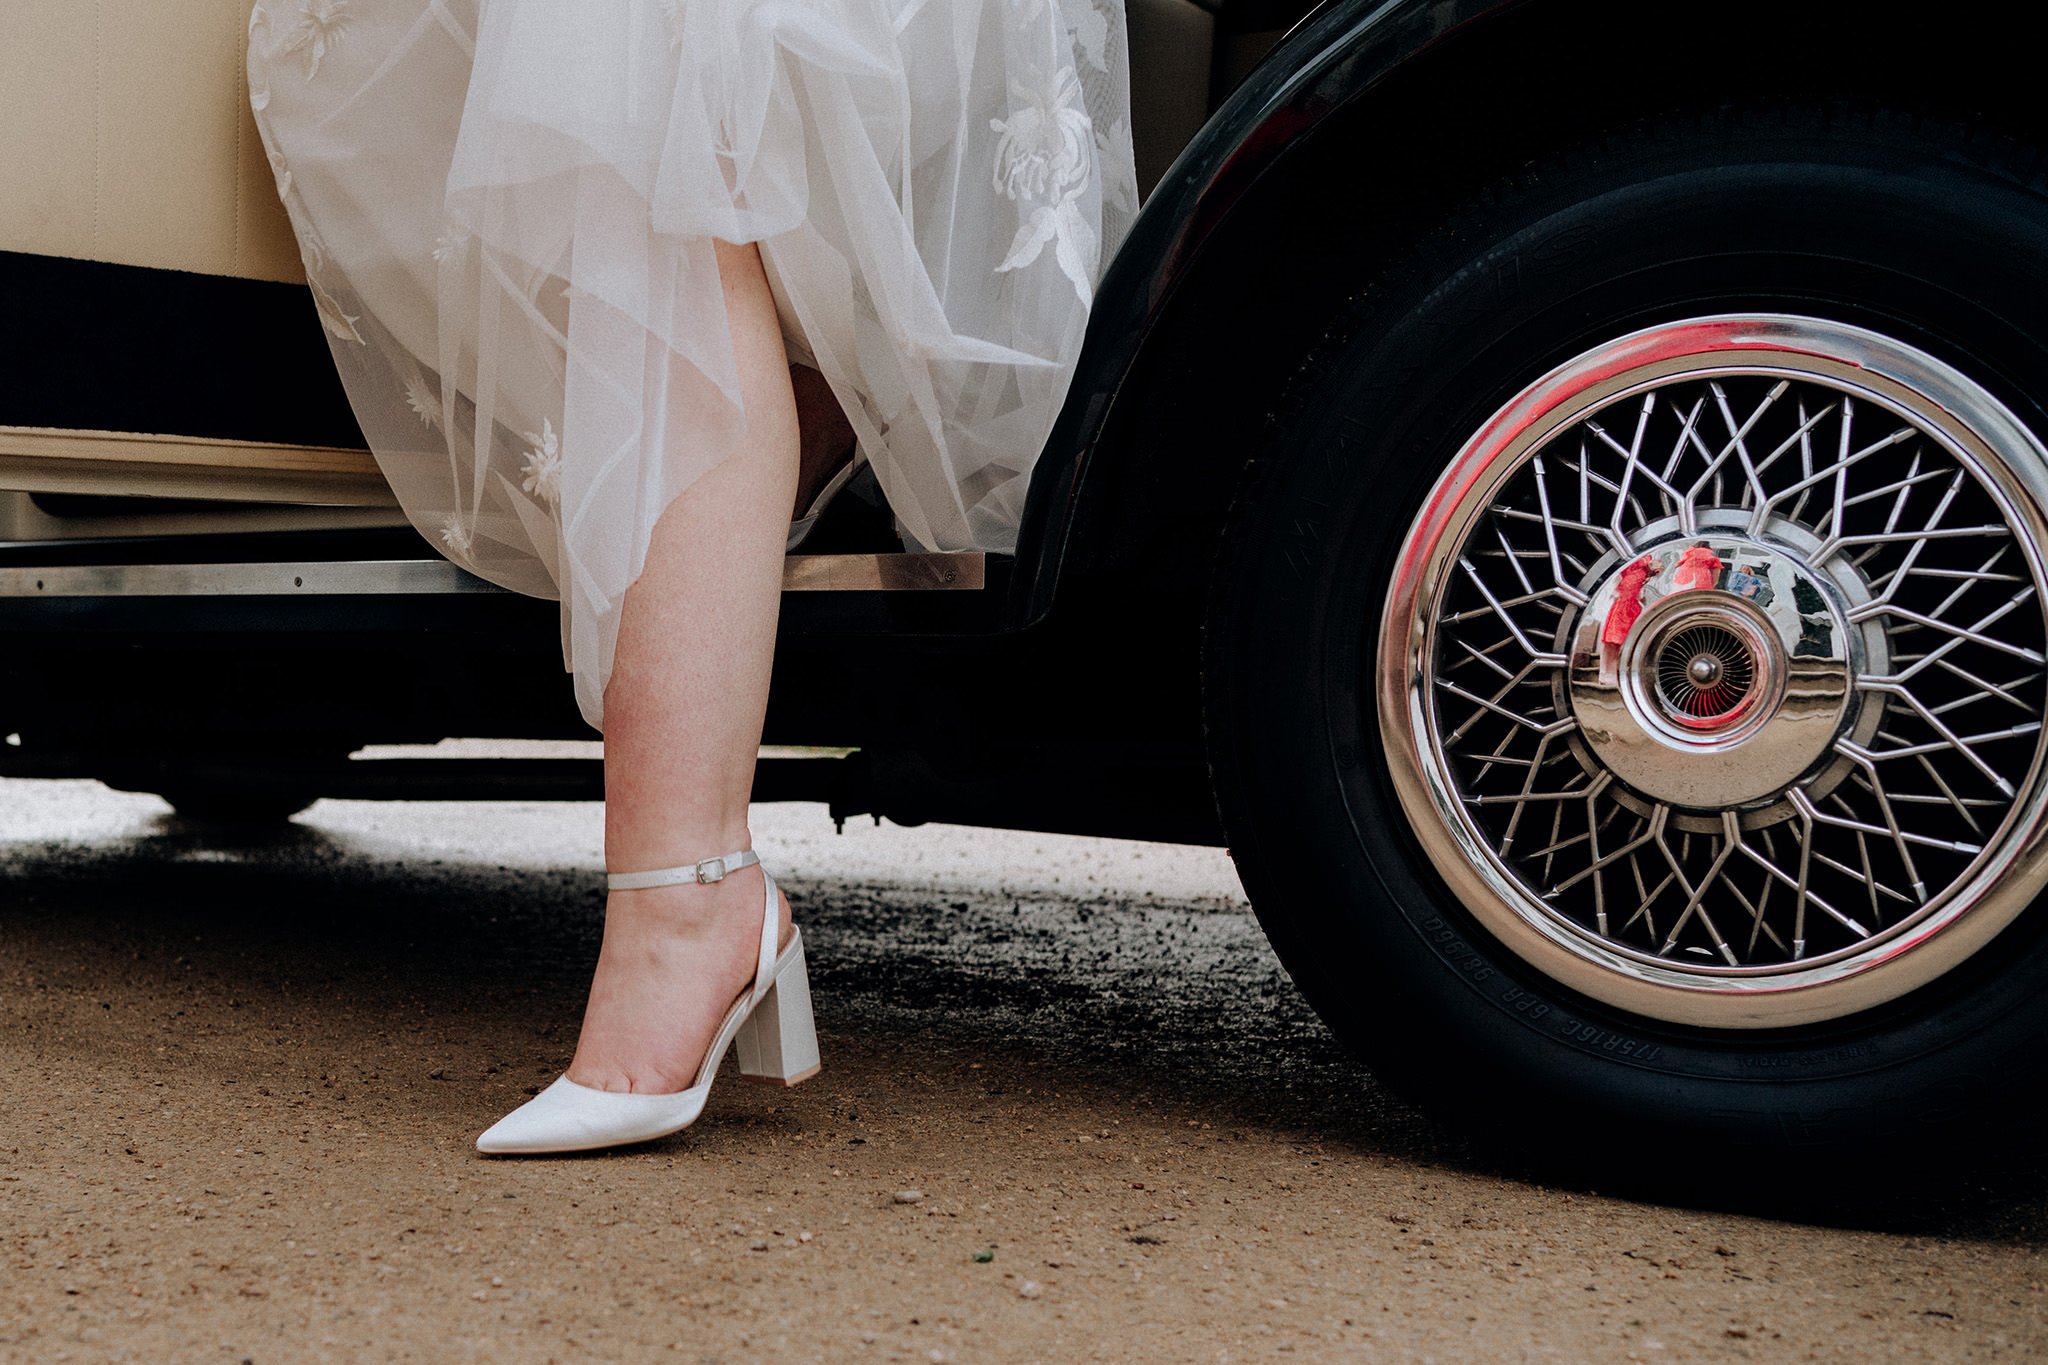 Bride stepping out of the car on her wedding day